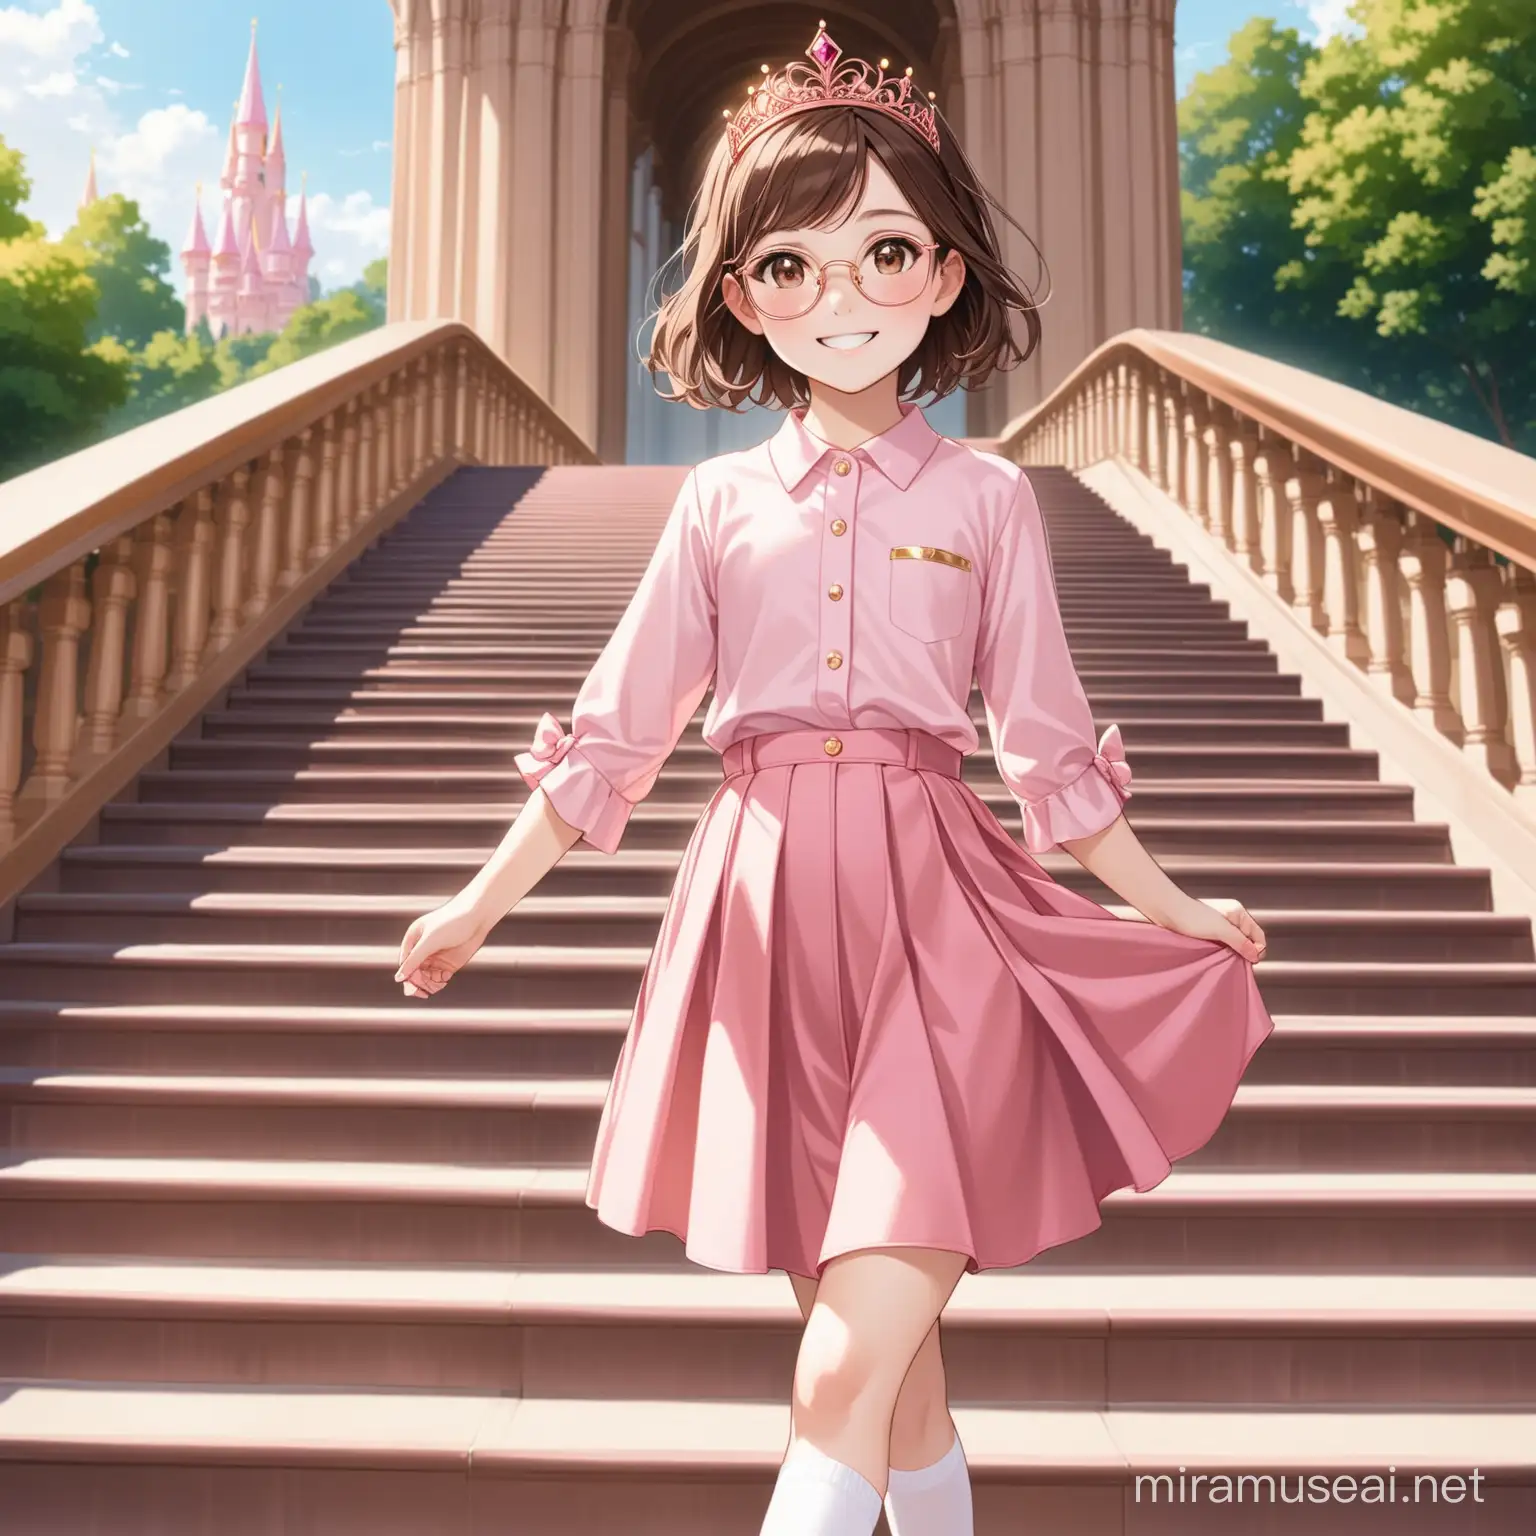 Joyful Young Girl Descending Palace Stairs in Rose Gold Glasses and Pink Ensemble